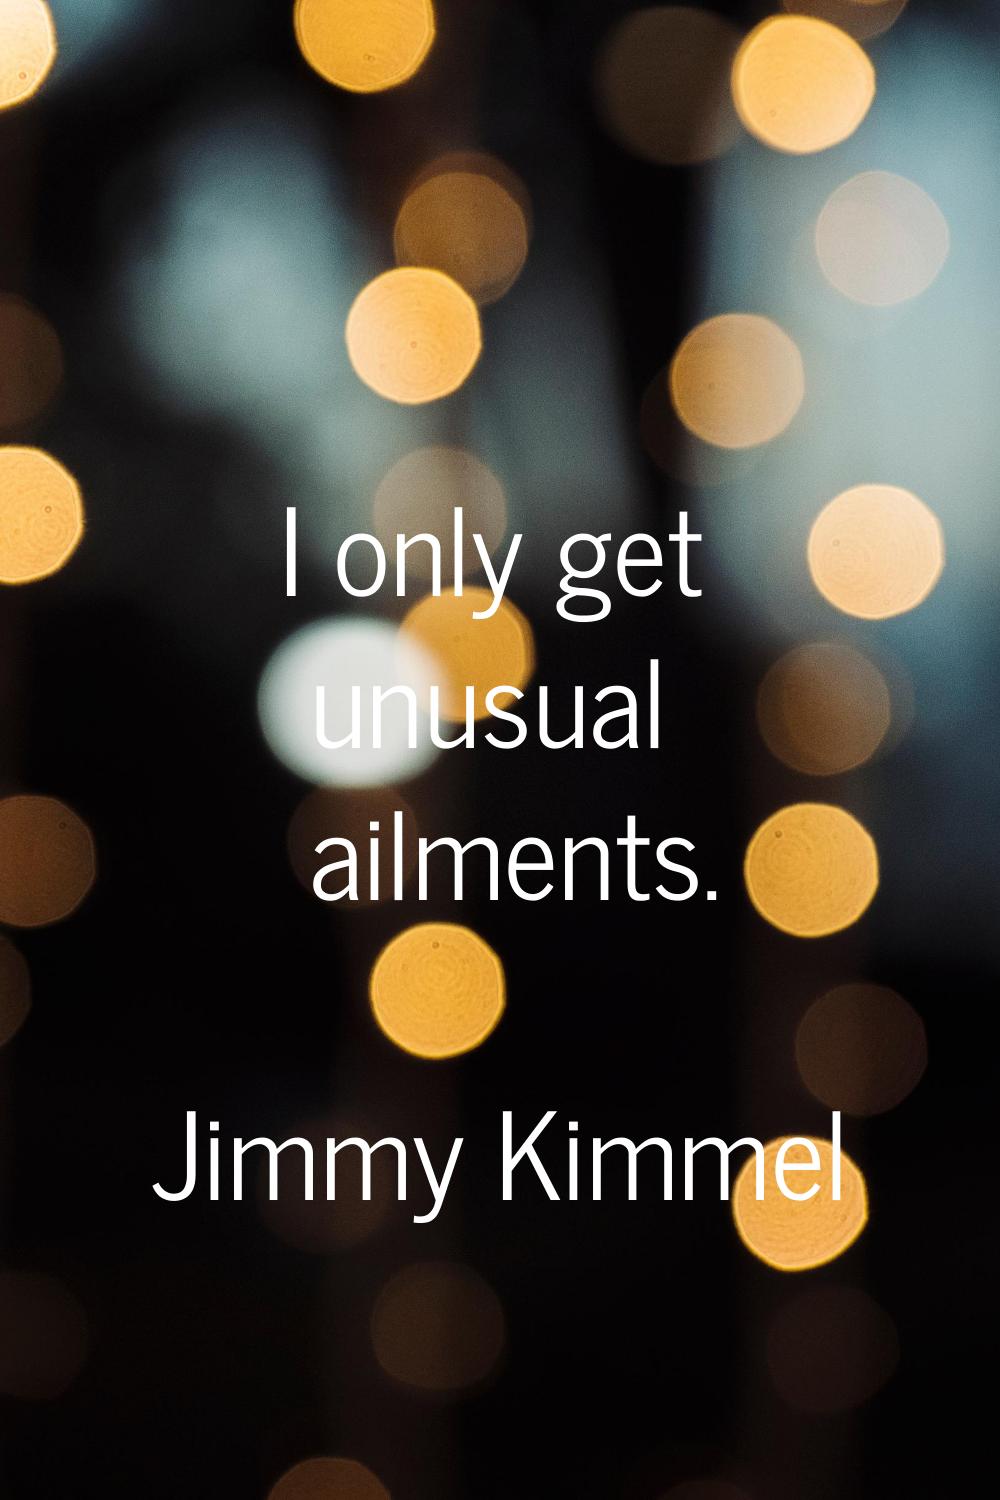 I only get unusual ailments.